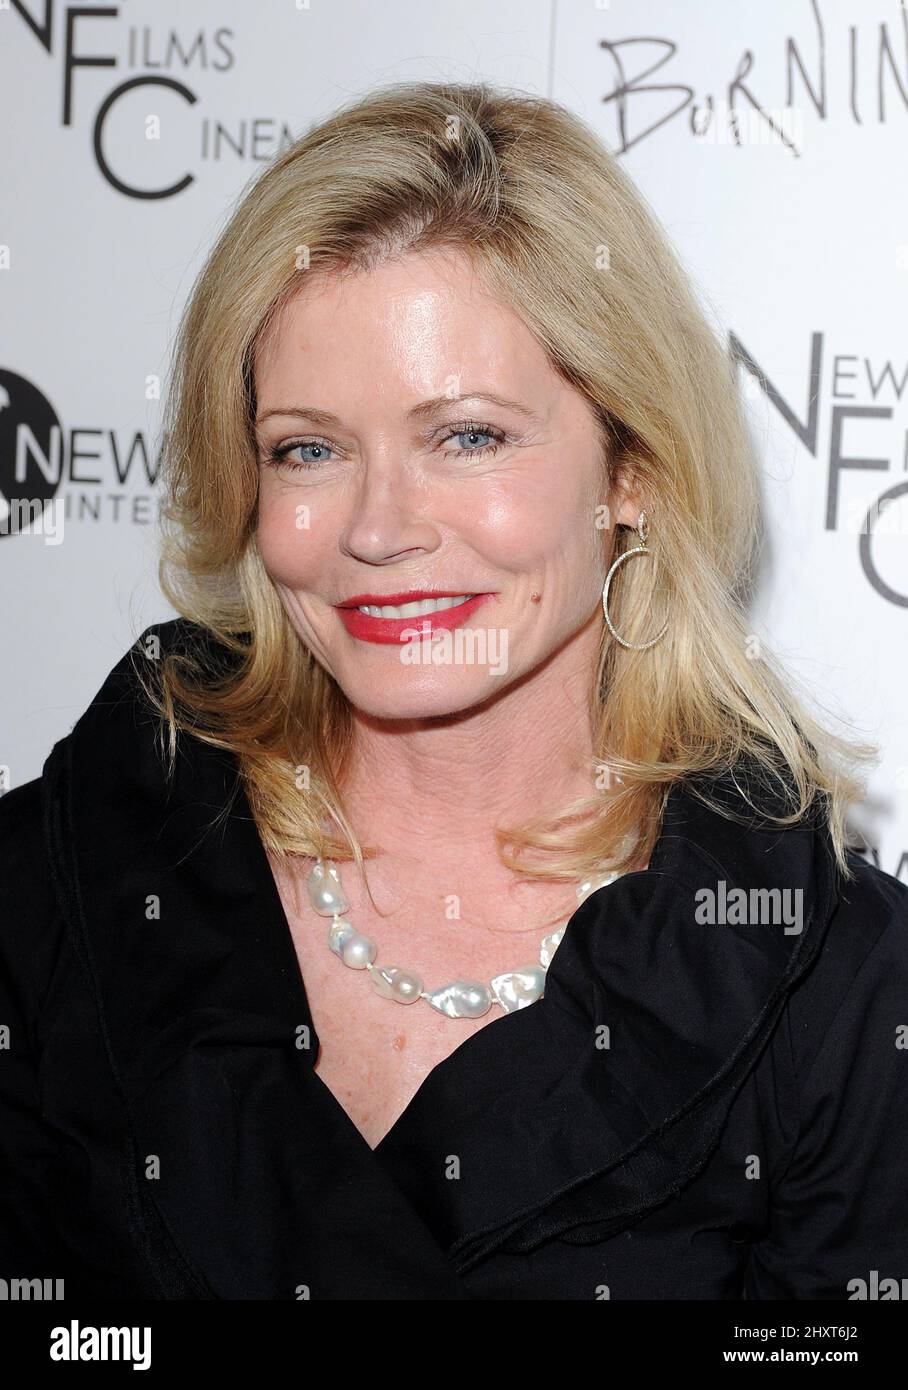 Sheree J. Wilson at the Los Angeles Premiere of 'Burning Palms' at the Arclight Hollyood Theatre on January 12, 2011 in Hollywood, California. Stock Photo